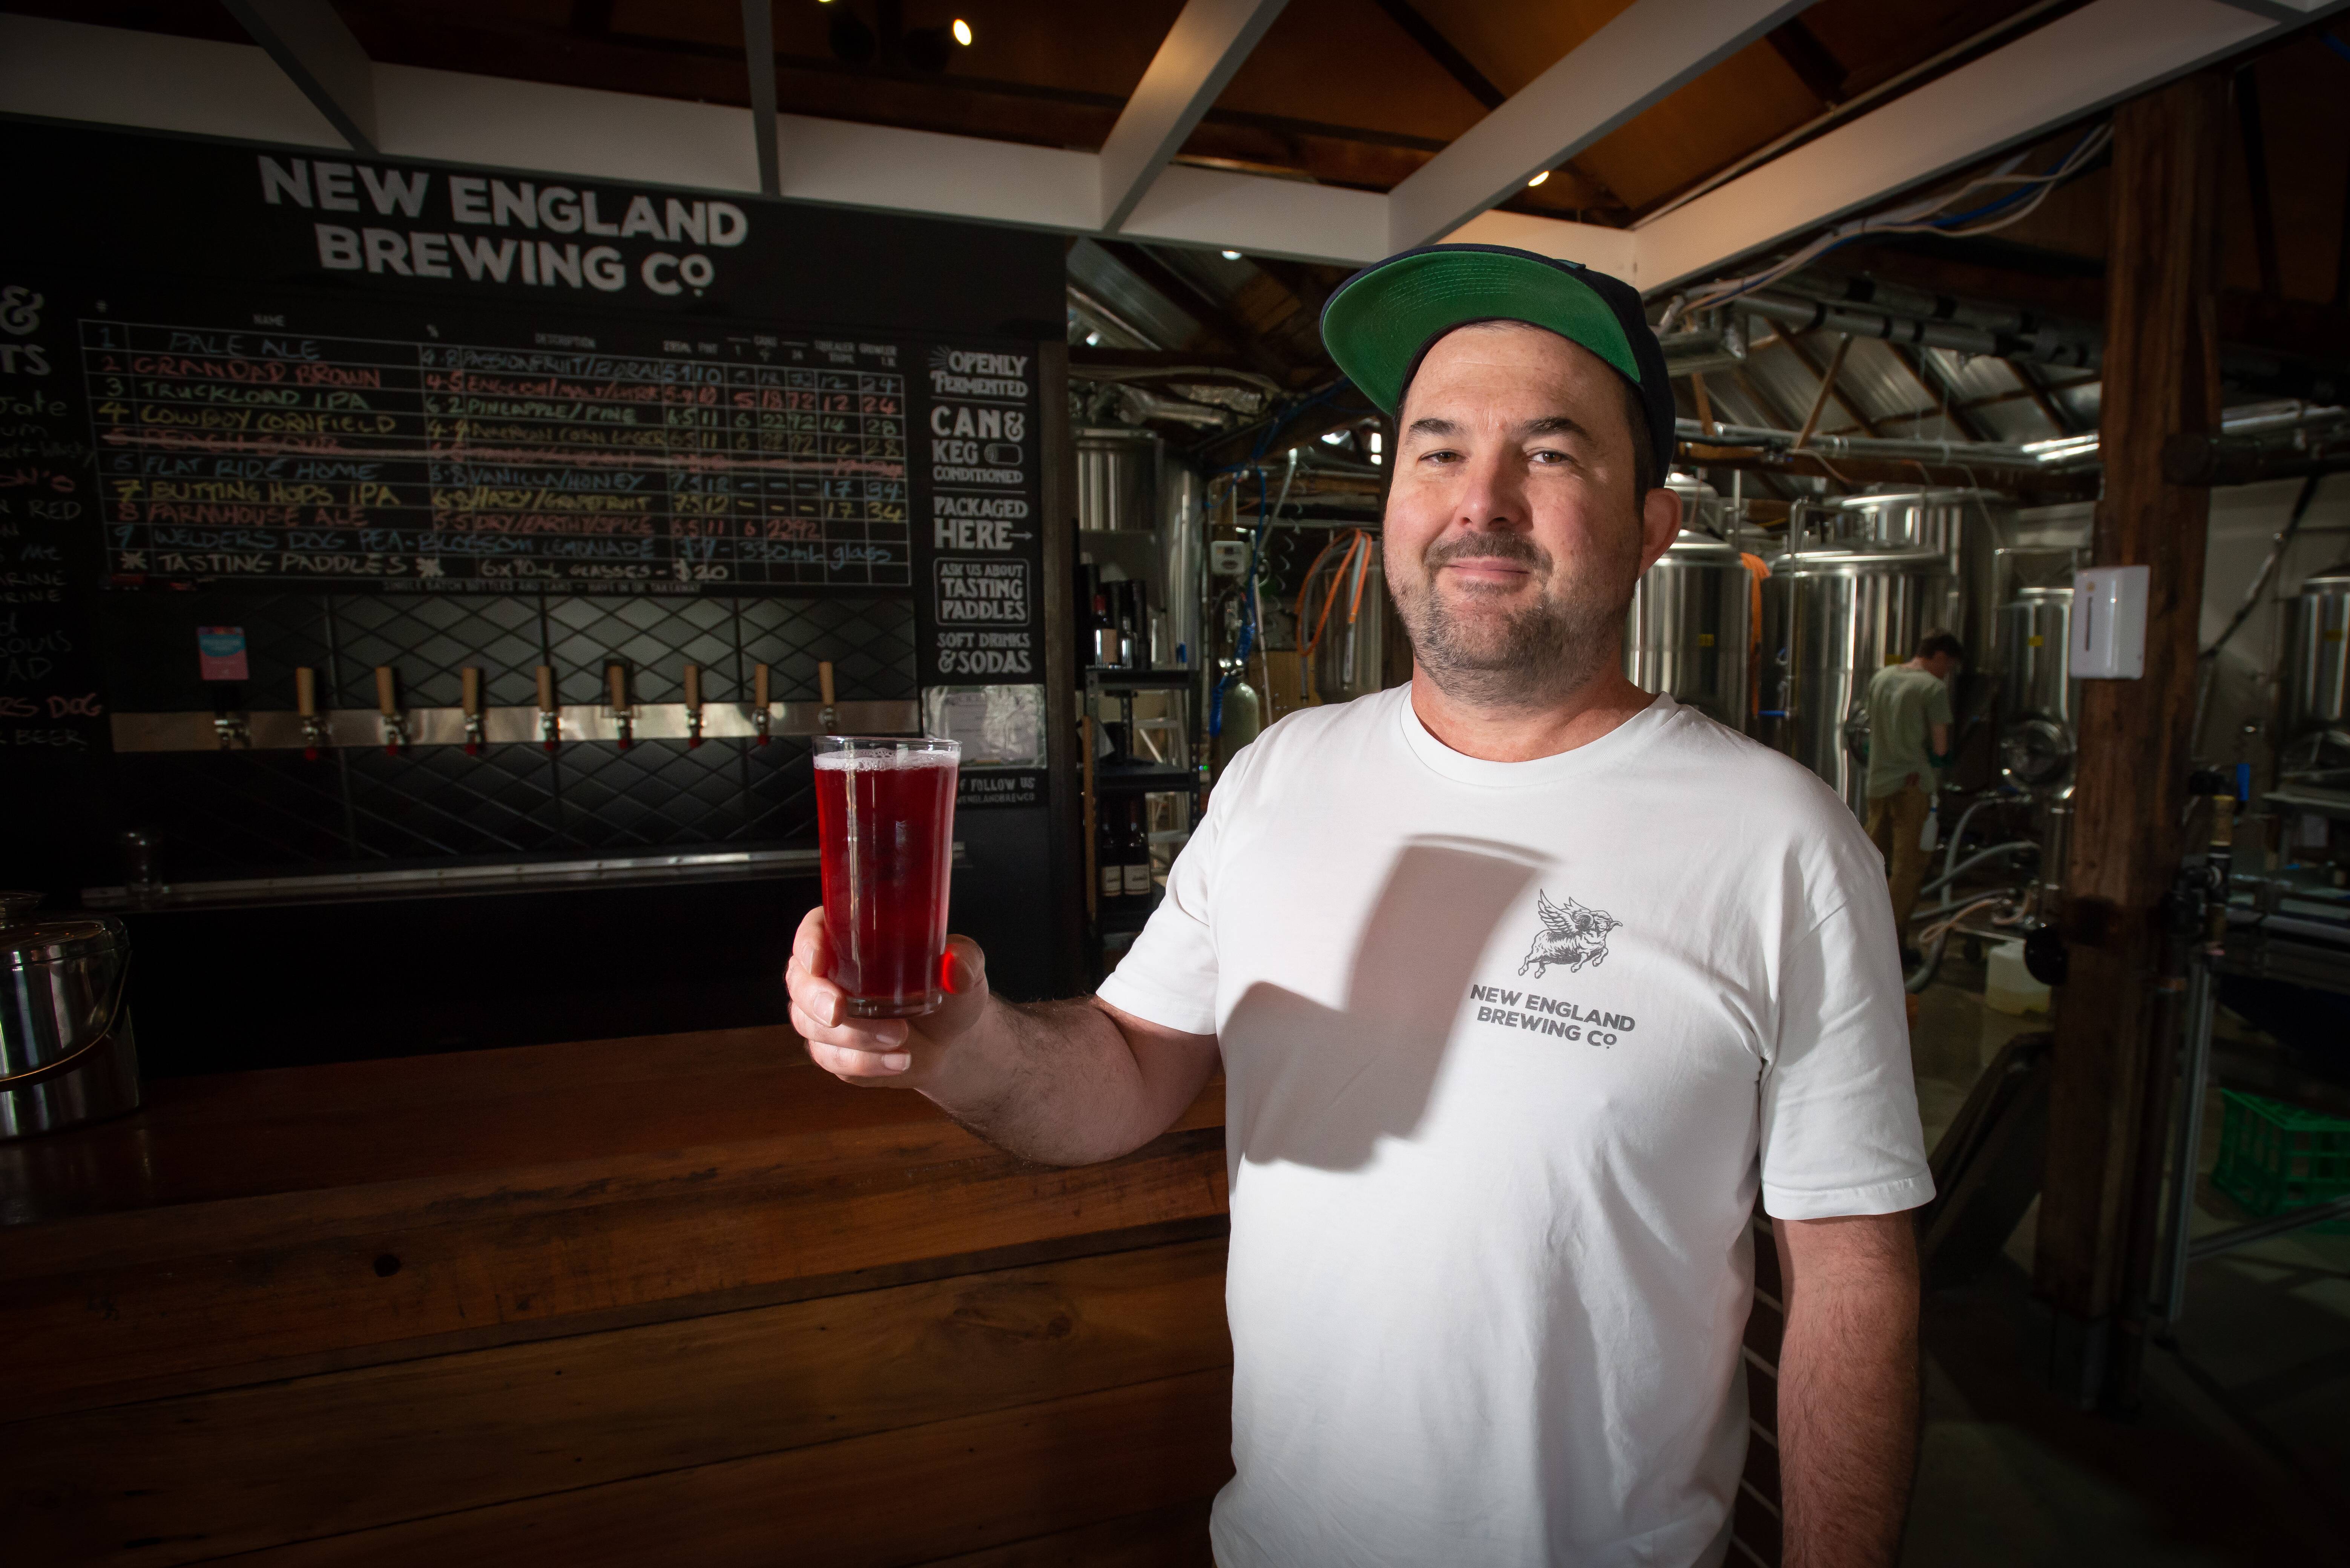 Uralla's New England Brewing Co is among breweries unhappy with